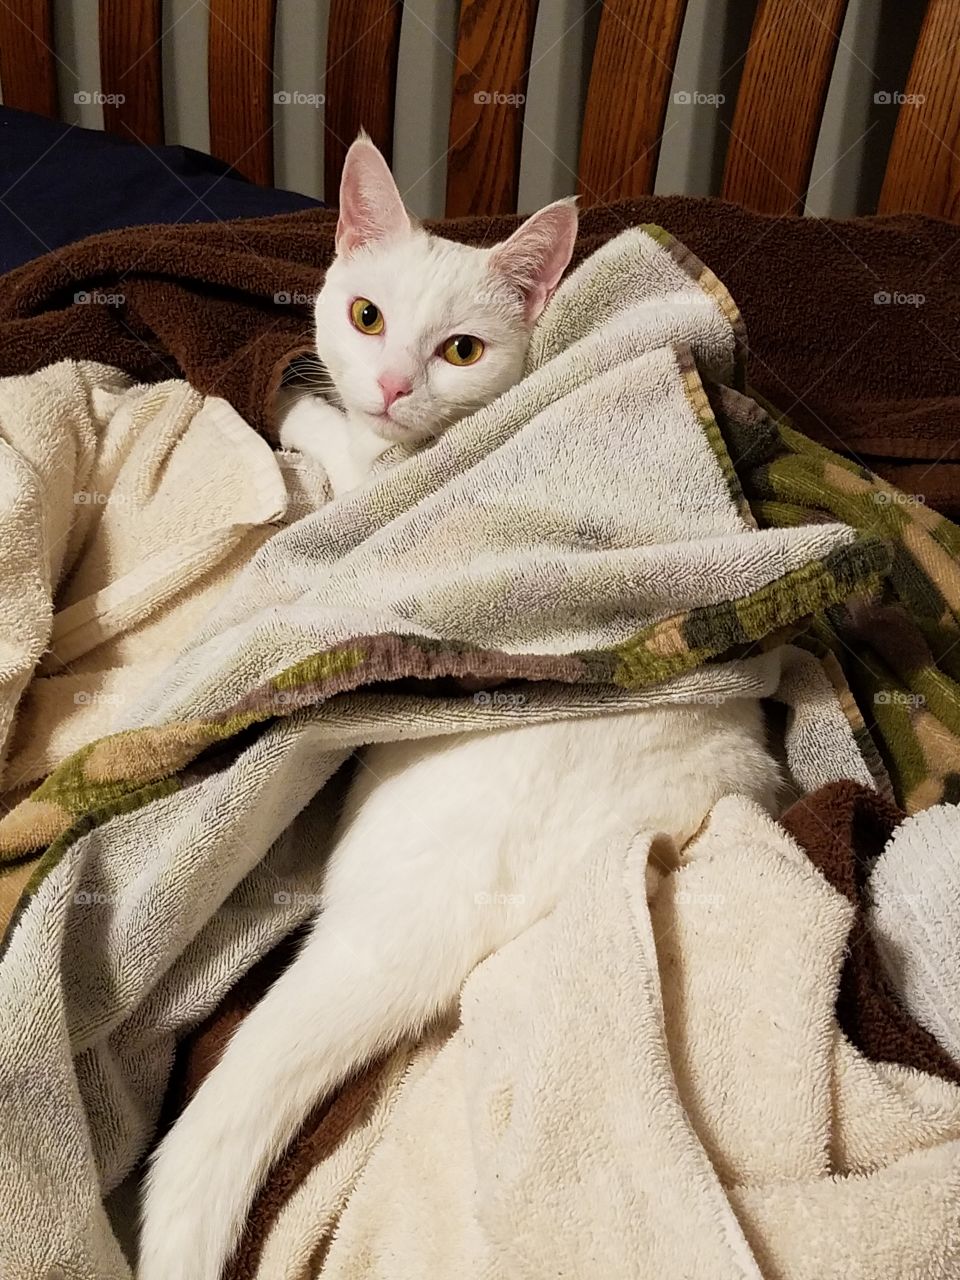 nothing like warm towels out of the dryer!